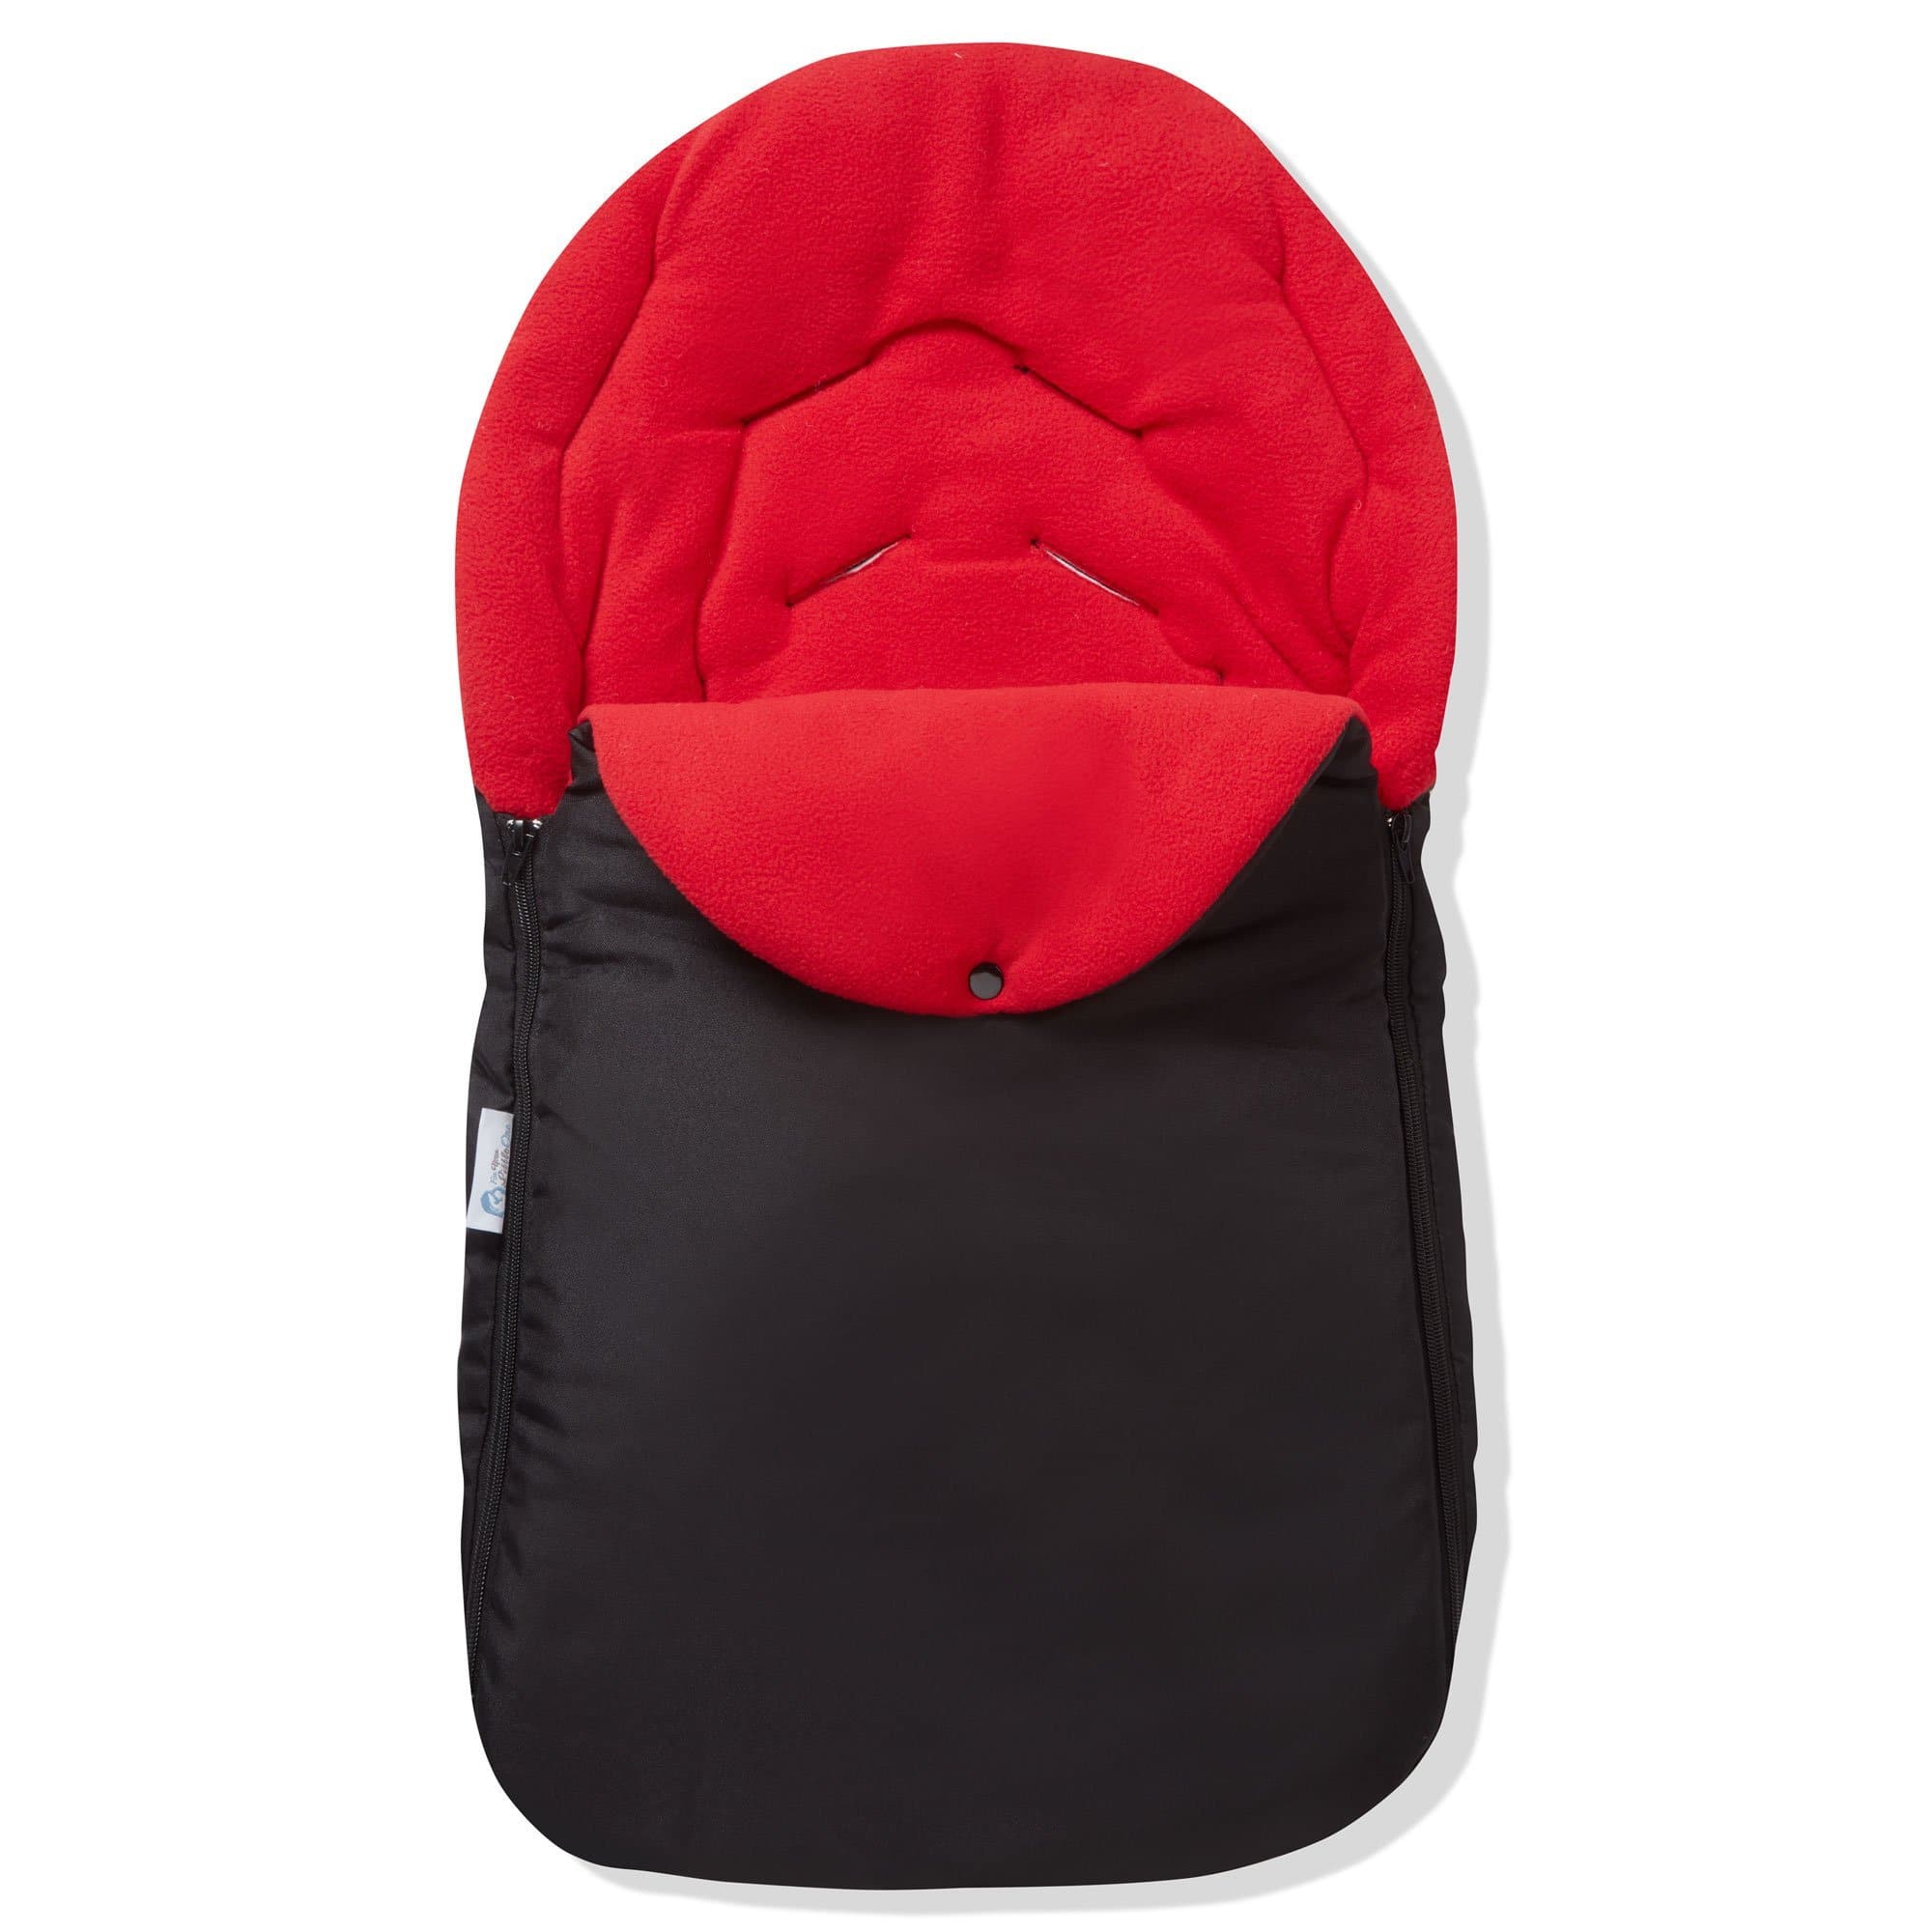 Car Seat Footmuff / Cosy Toes Compatible with GB - For Your Little One